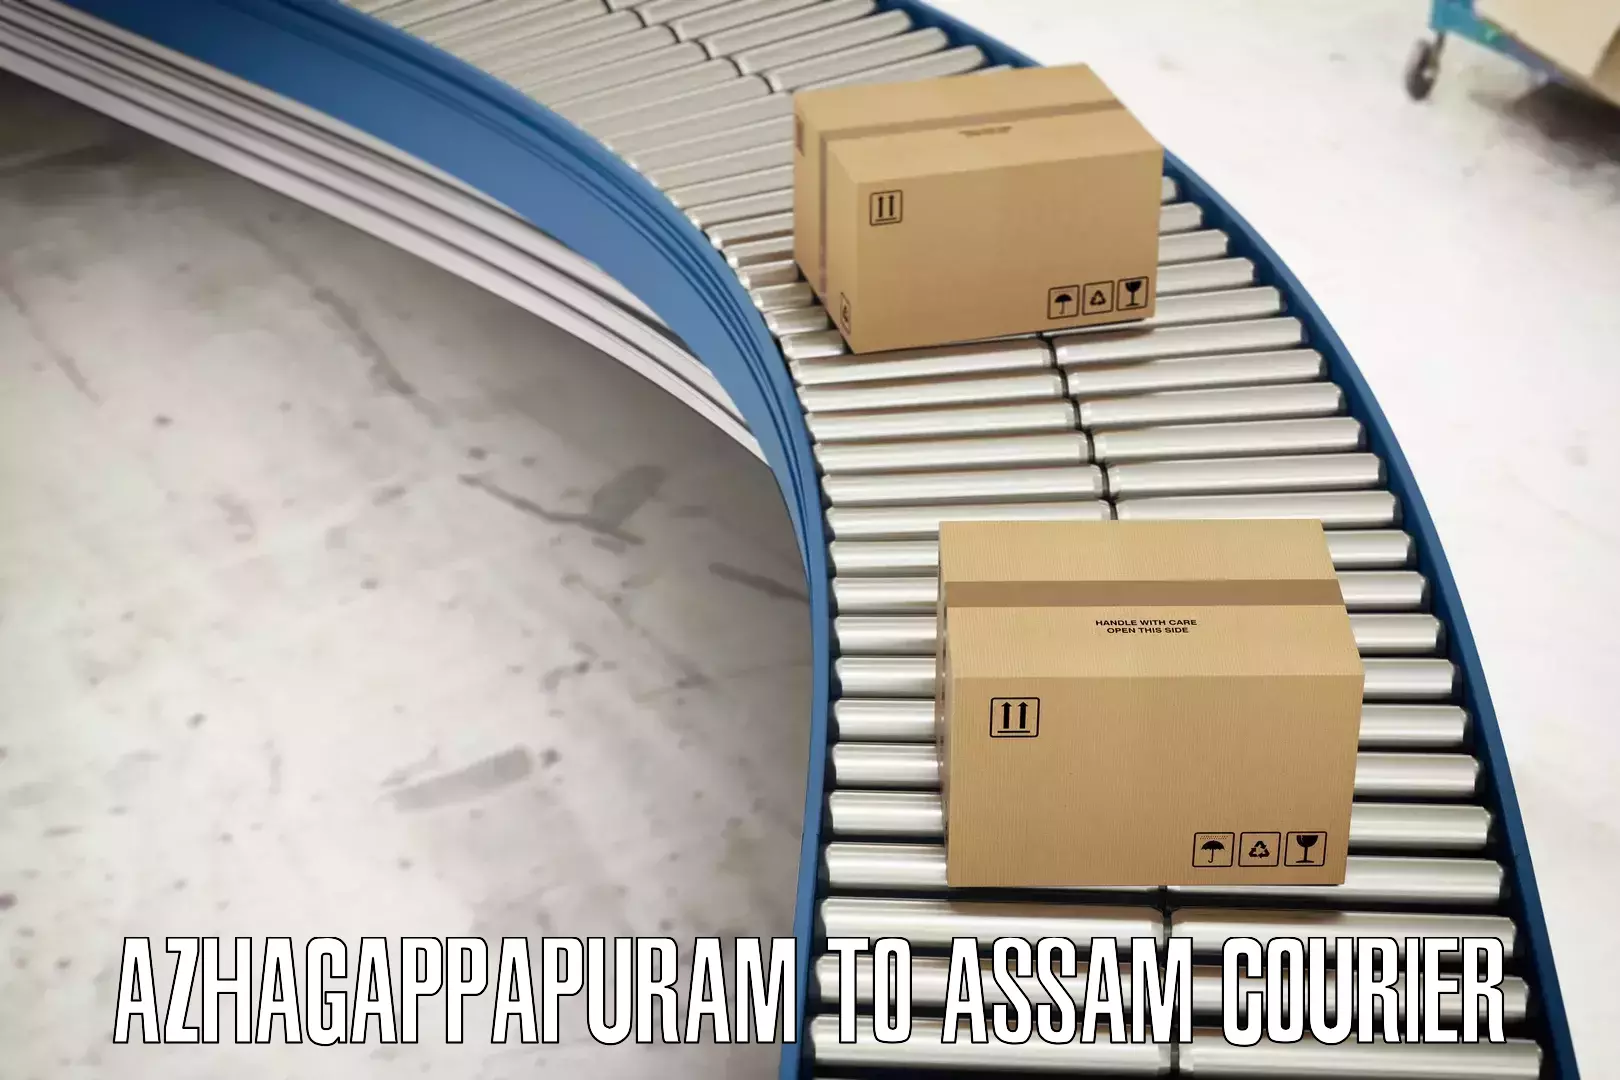 Easy access courier services Azhagappapuram to Udharbond